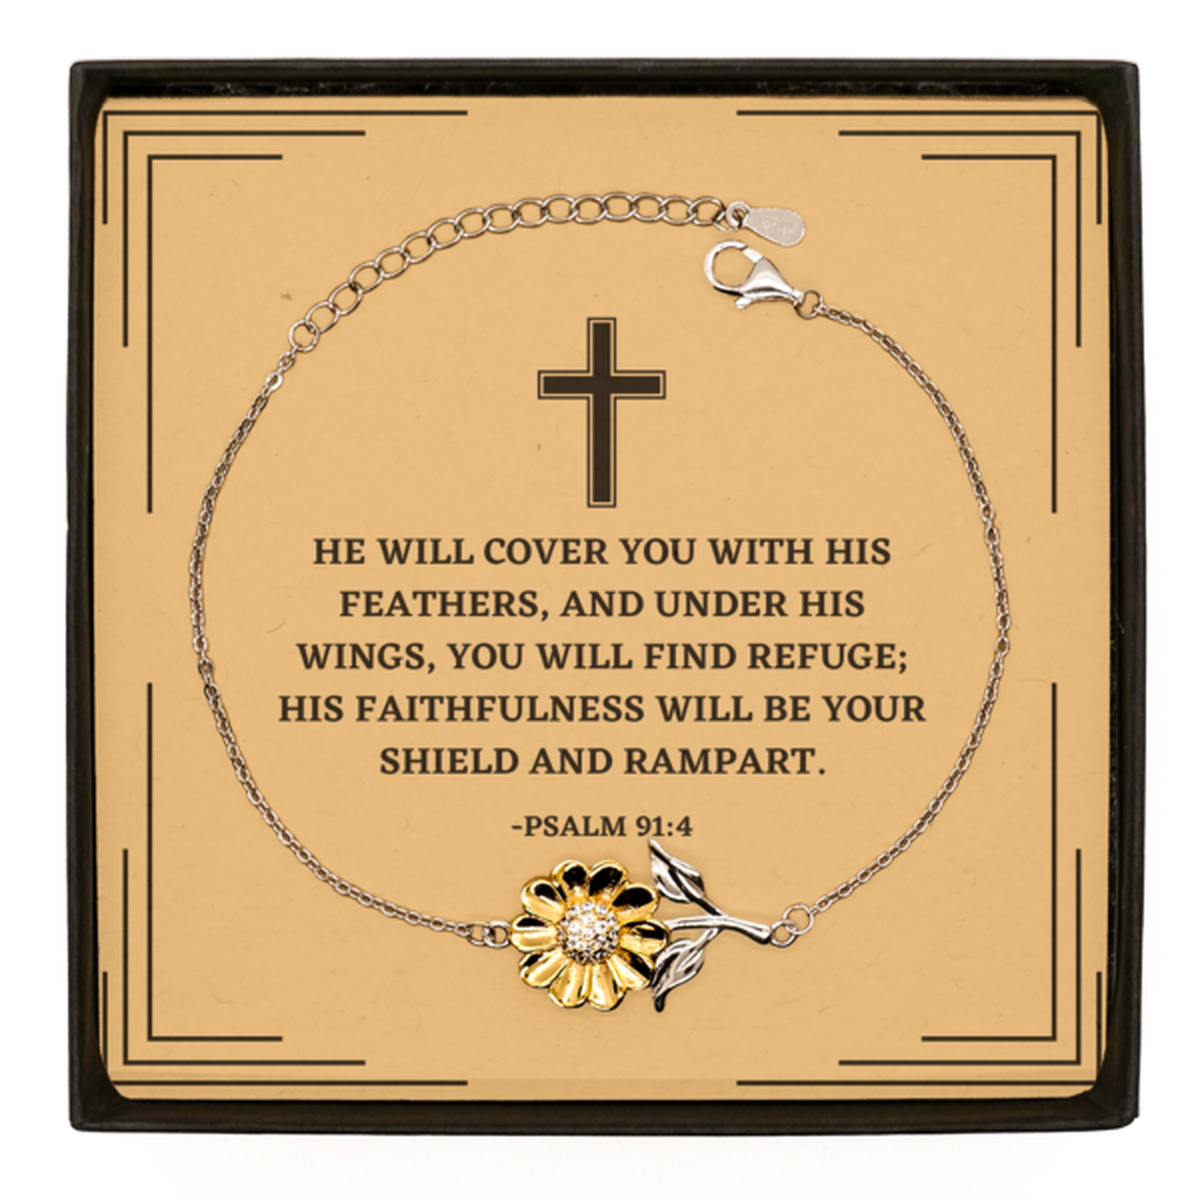 Baptism Gifts For Teenage Boys Girls, Christian Bible Verse Sterling Silver Sunflower Bracelet, He will cover you with his feathers, Confirmation Gifts, Bible Verse Card for Son, Godson, Grandson